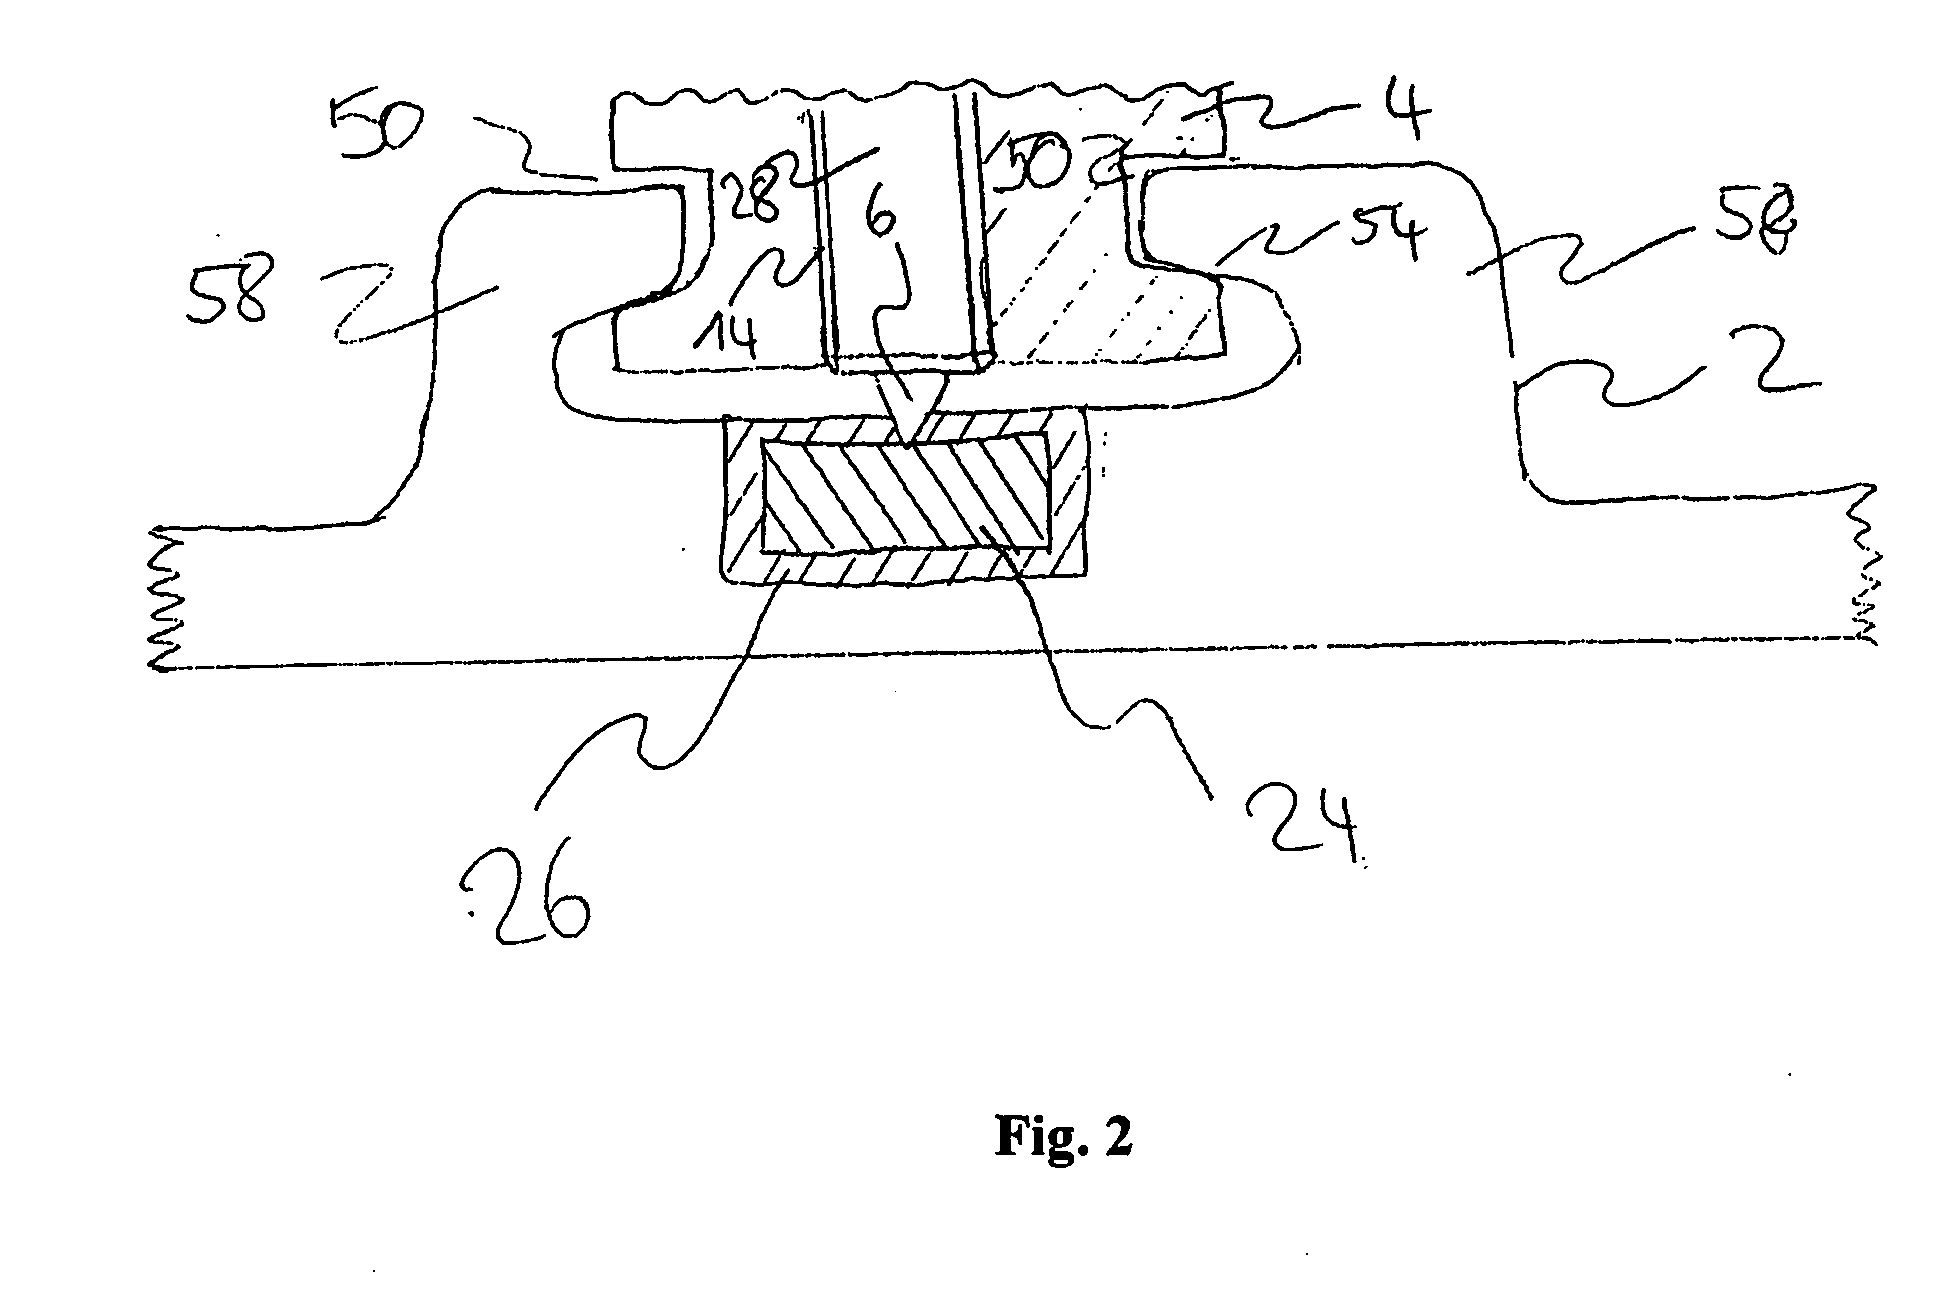 Power distribution system for supplying a rail-mounted monument in an aircraft with electric power